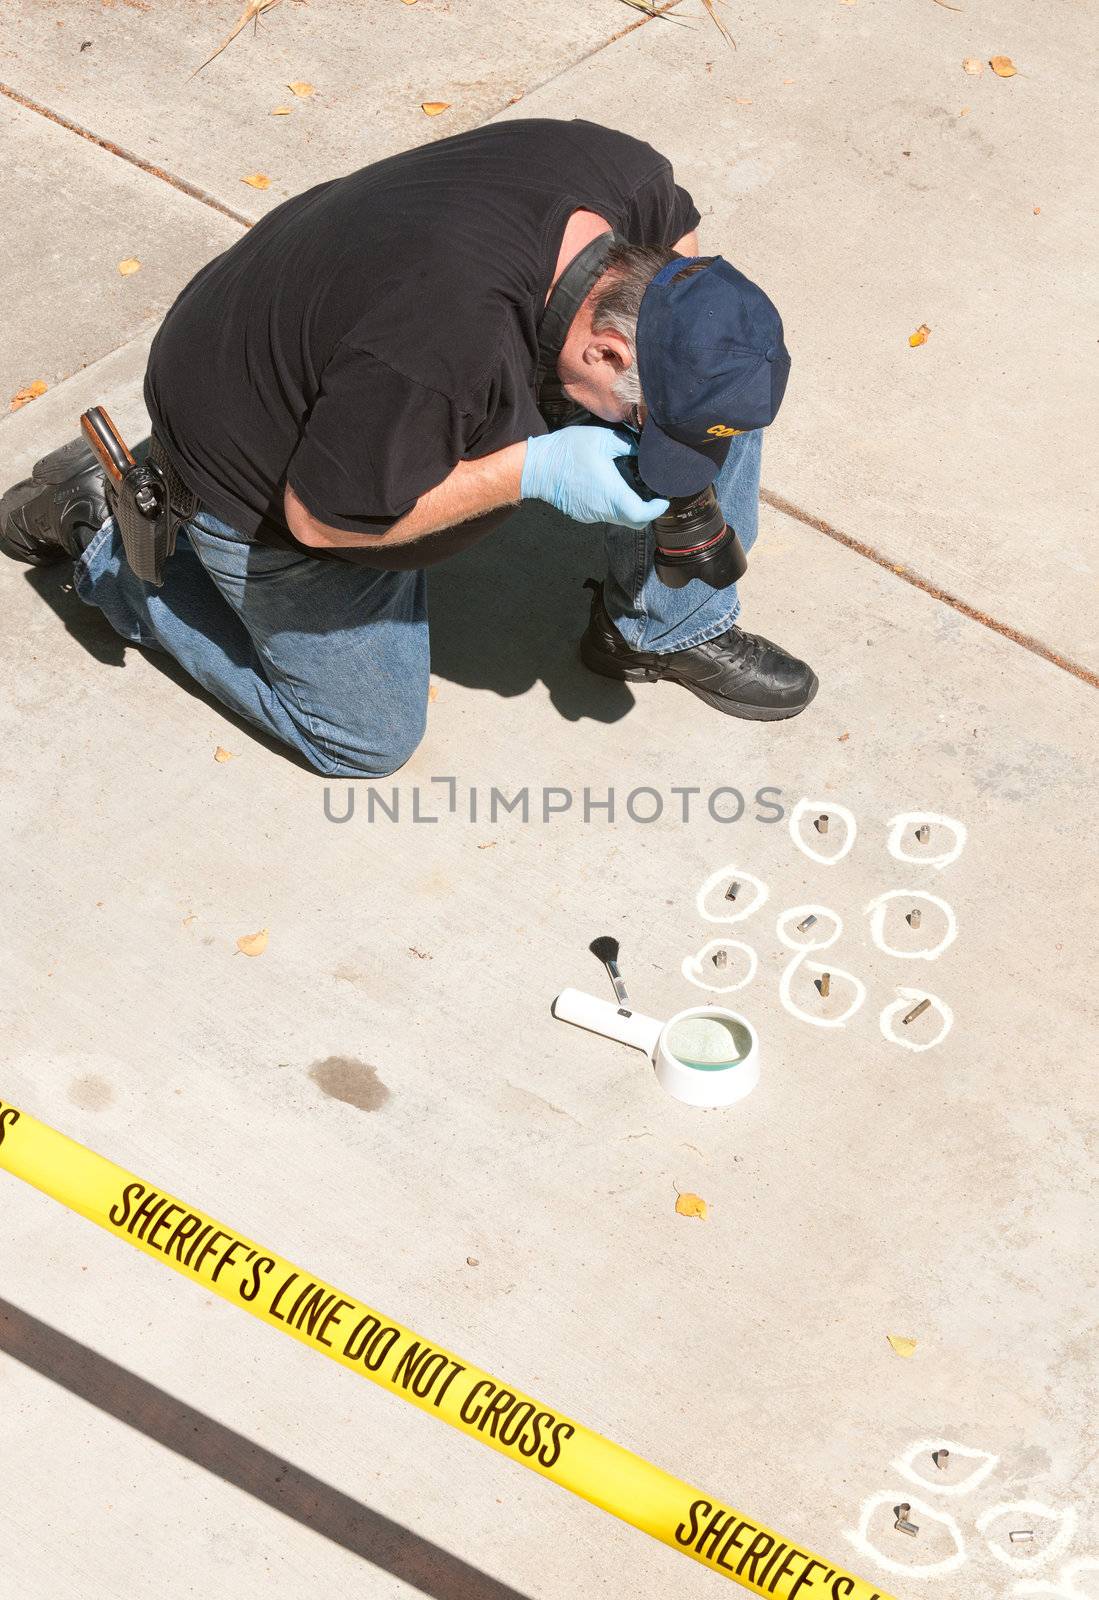 Detective studying a crimes scene taking photographs 